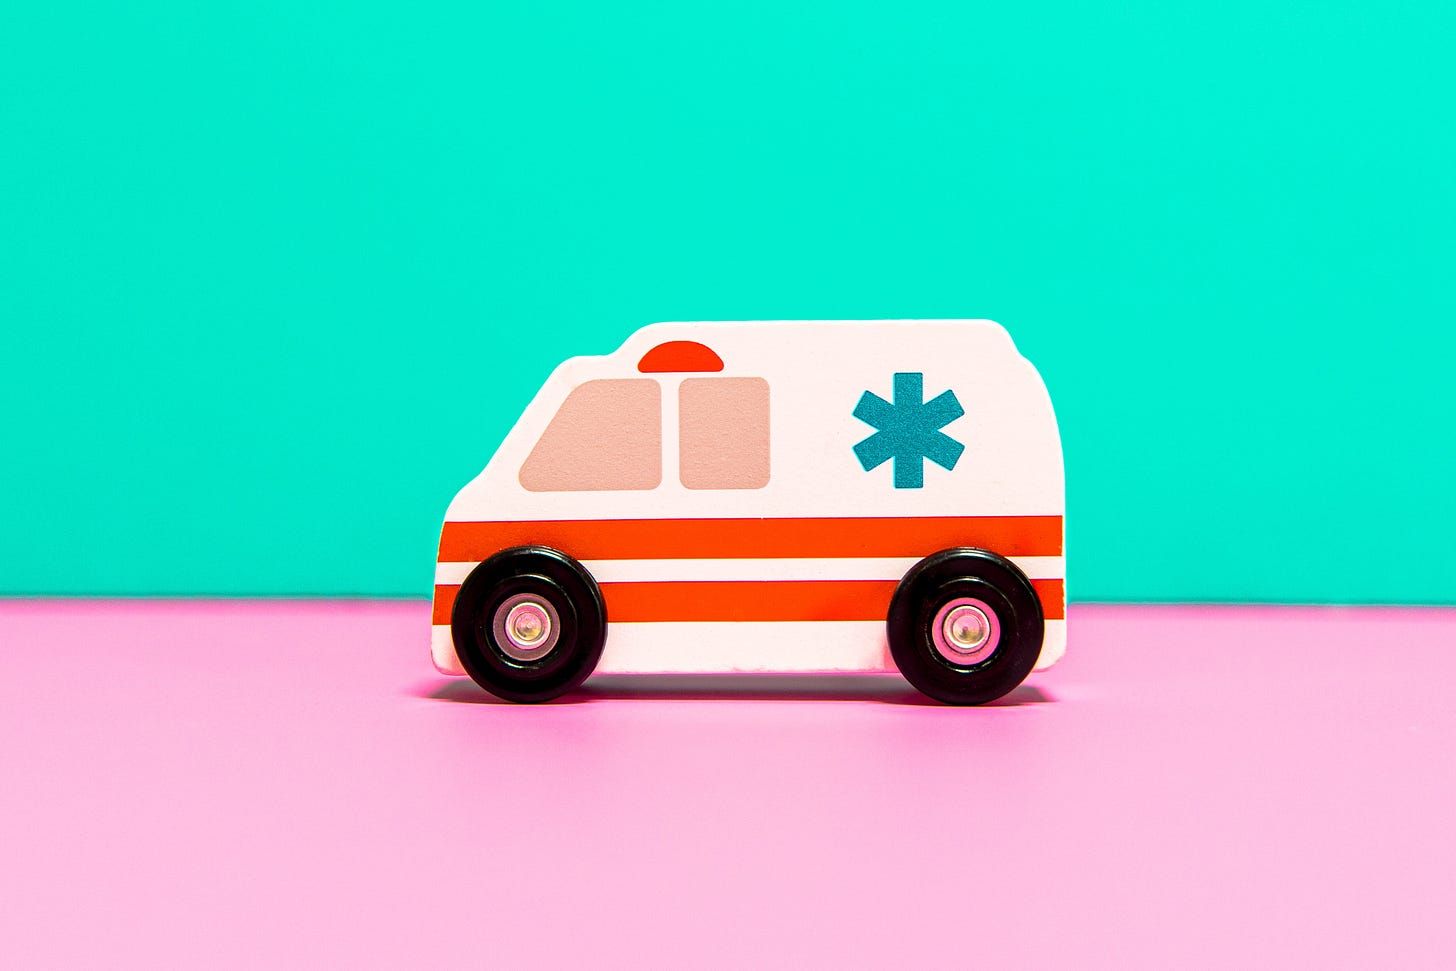 a toy ambulance on a pink table with a turquoise background